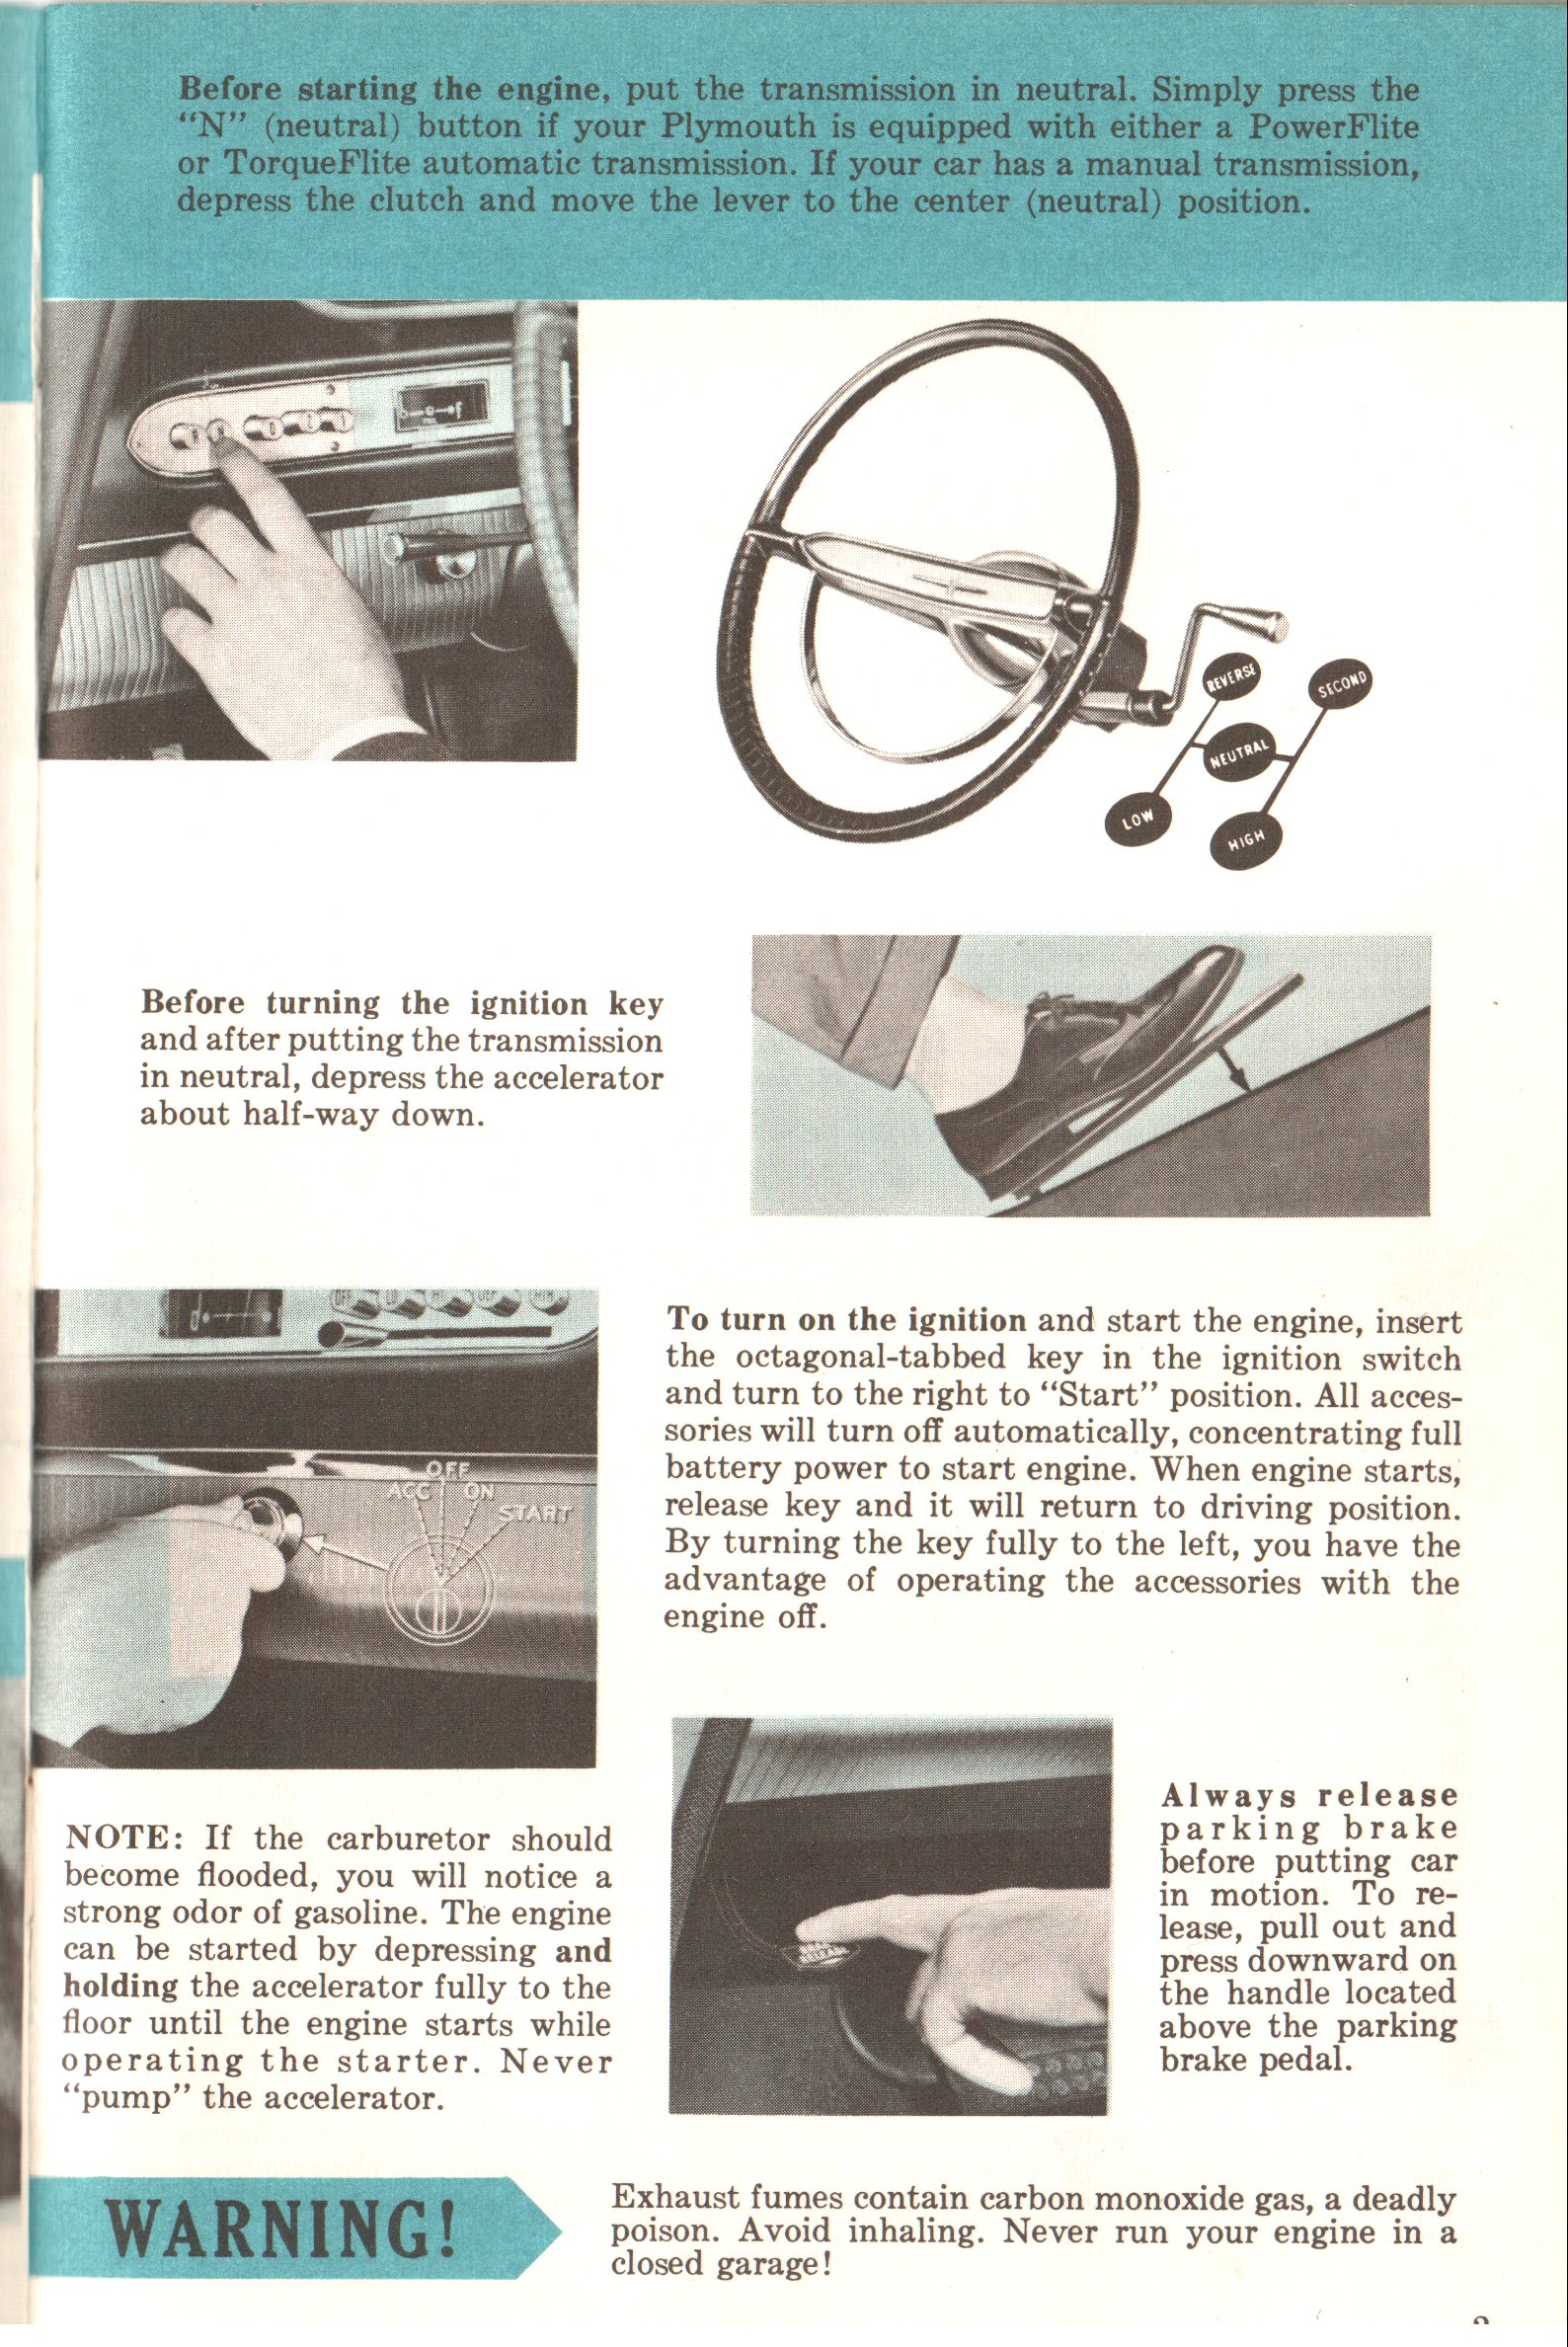 1960_Plymouth_Owners_Manual-03